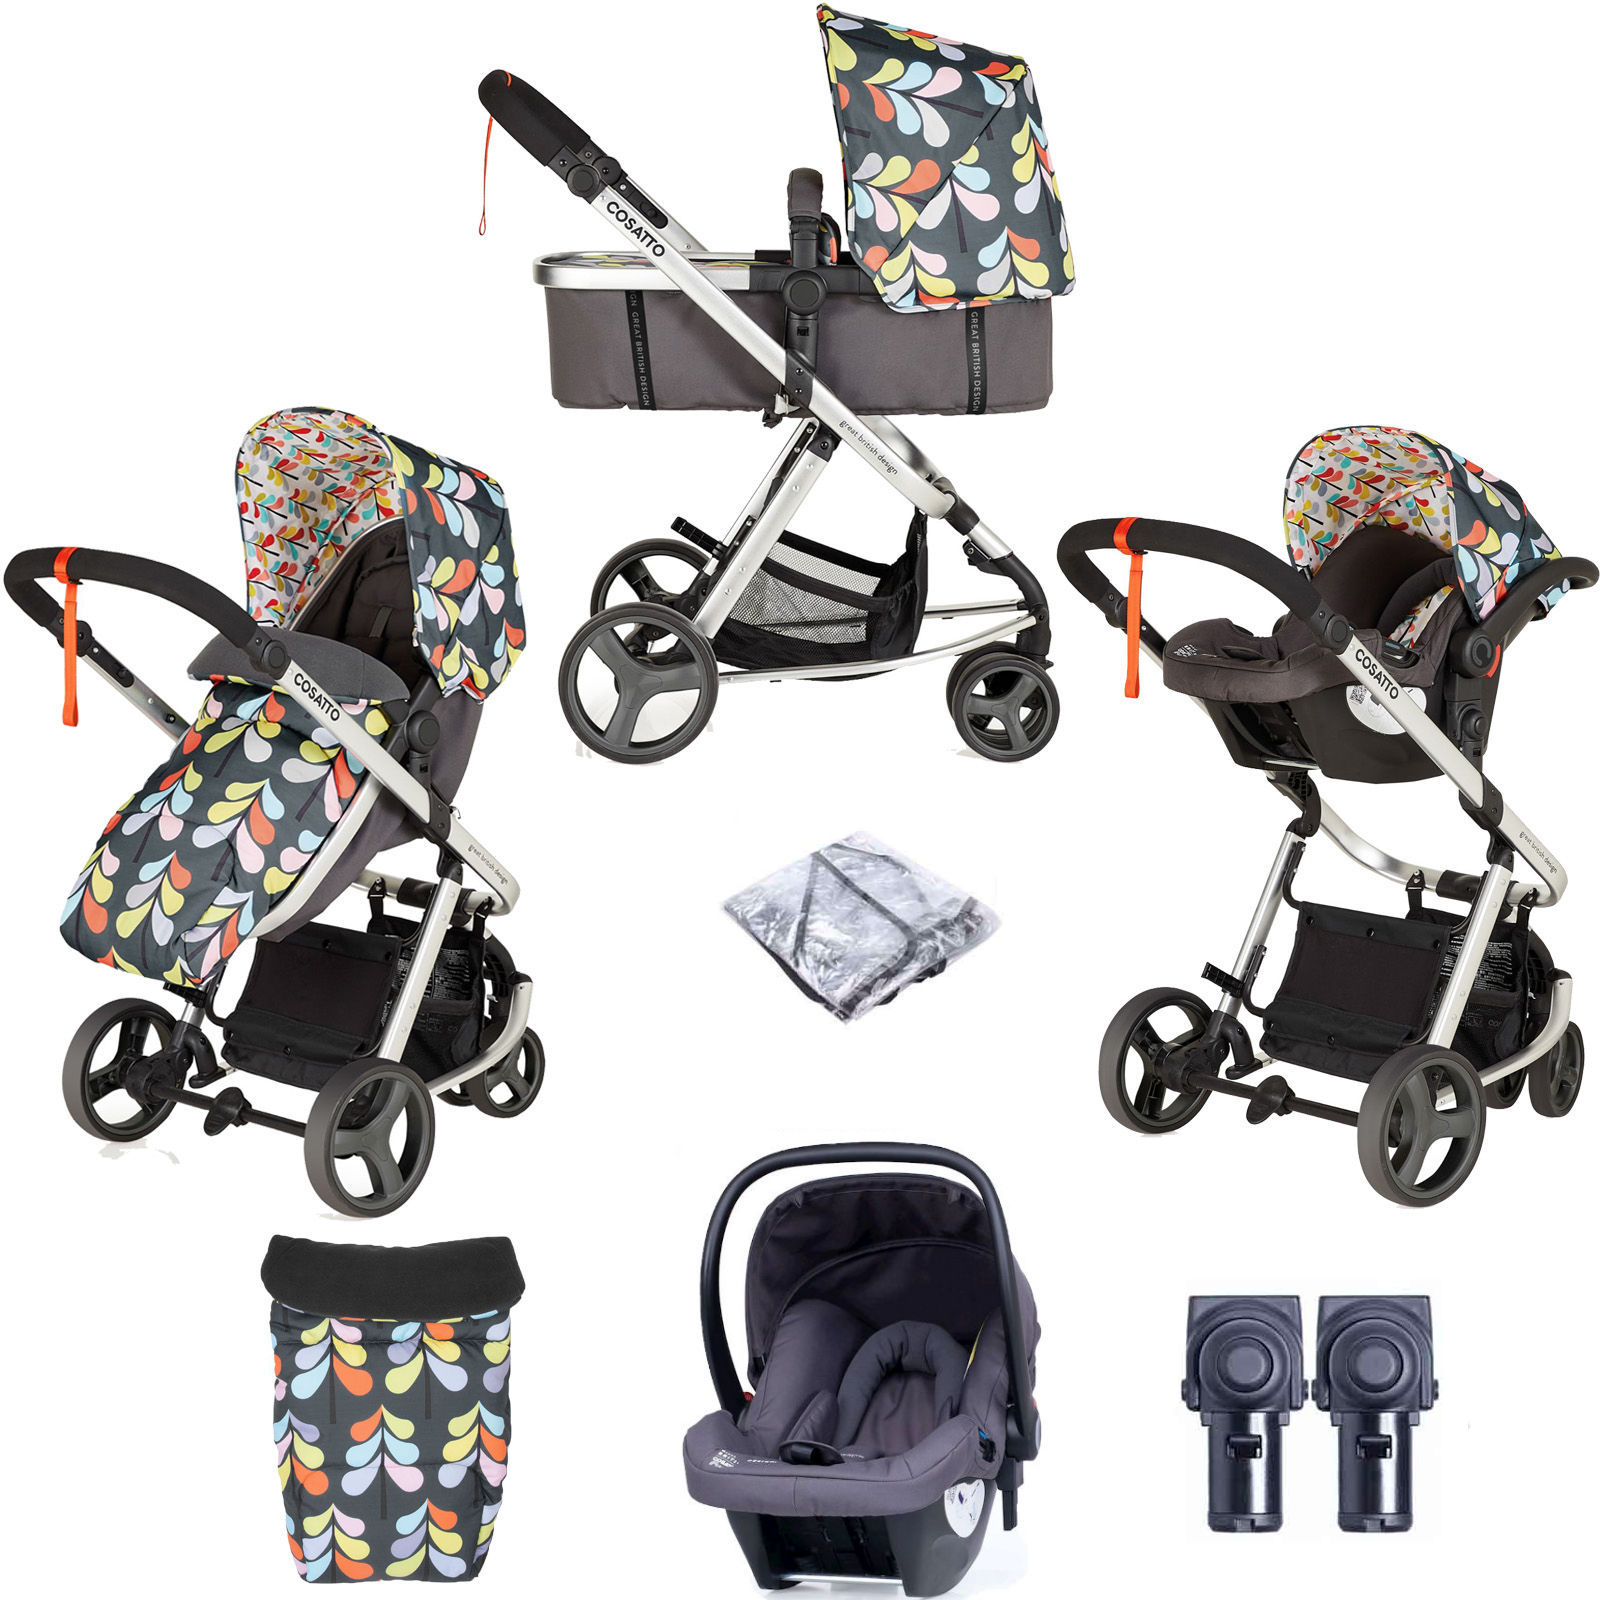 Cosatto Giggle Mix (Hold) Pramette Travel System - Nordik